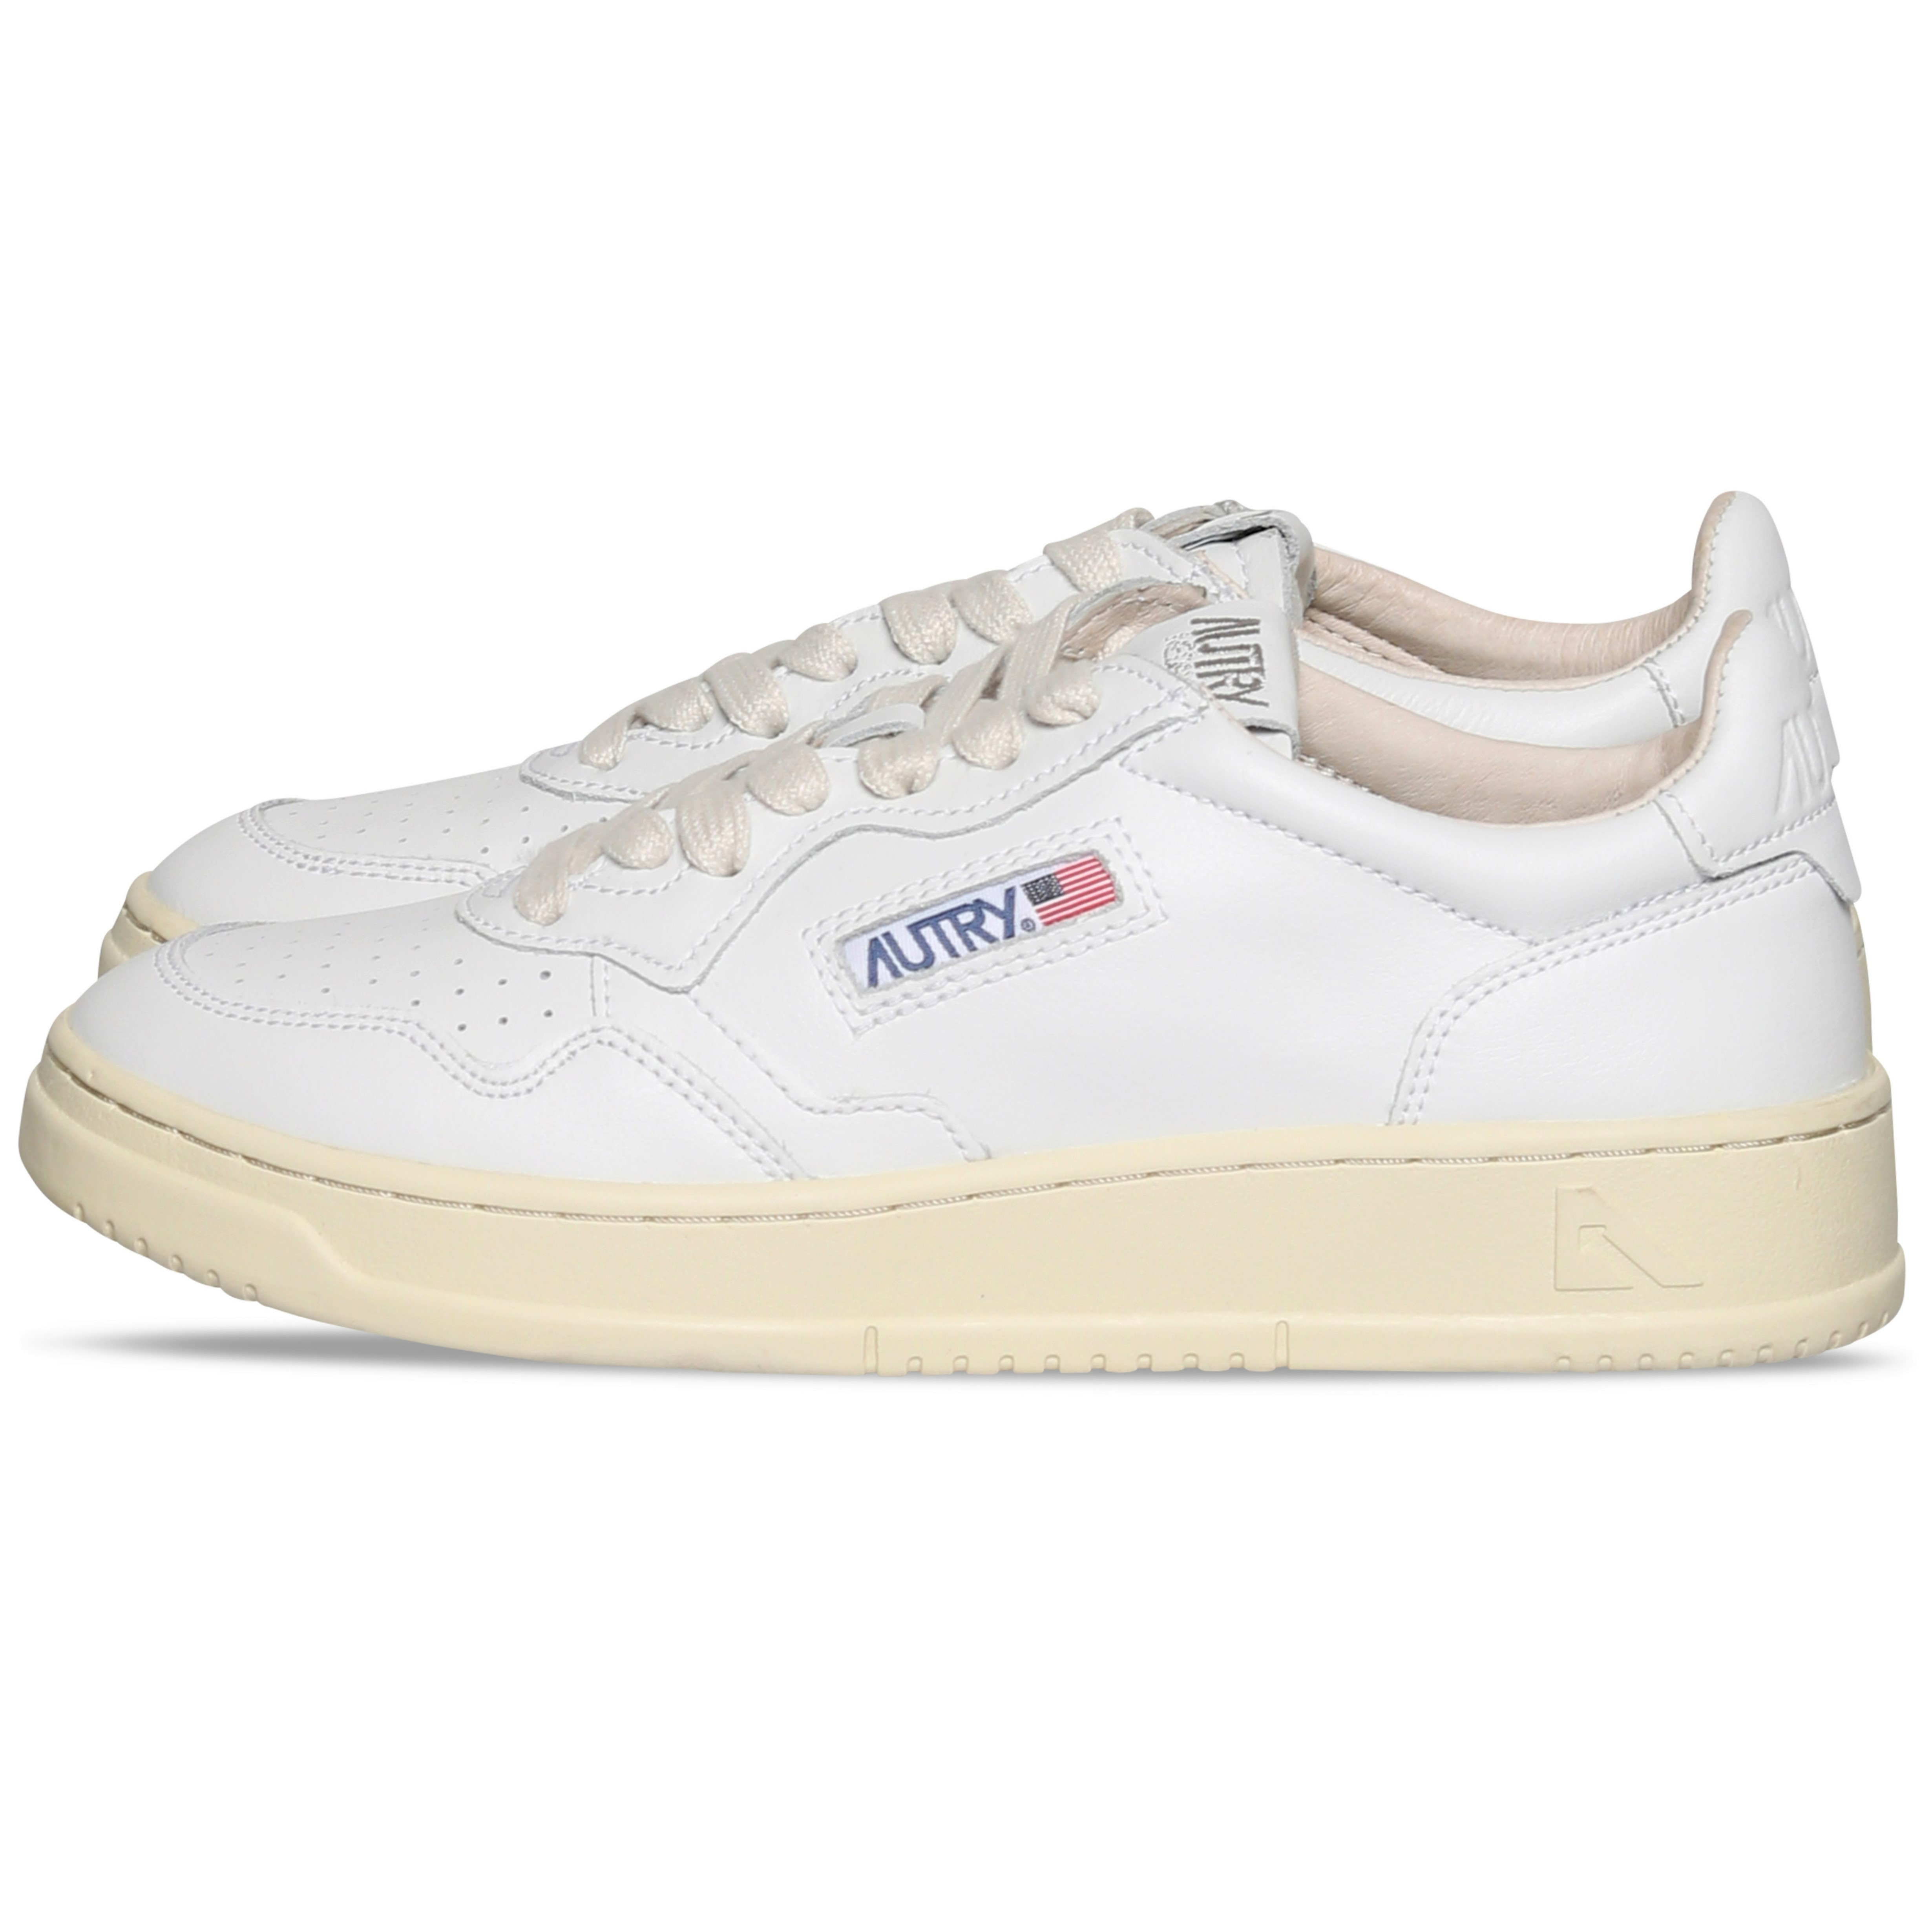 Autry Action Shoes Low Sneaker White/Draw Action 38